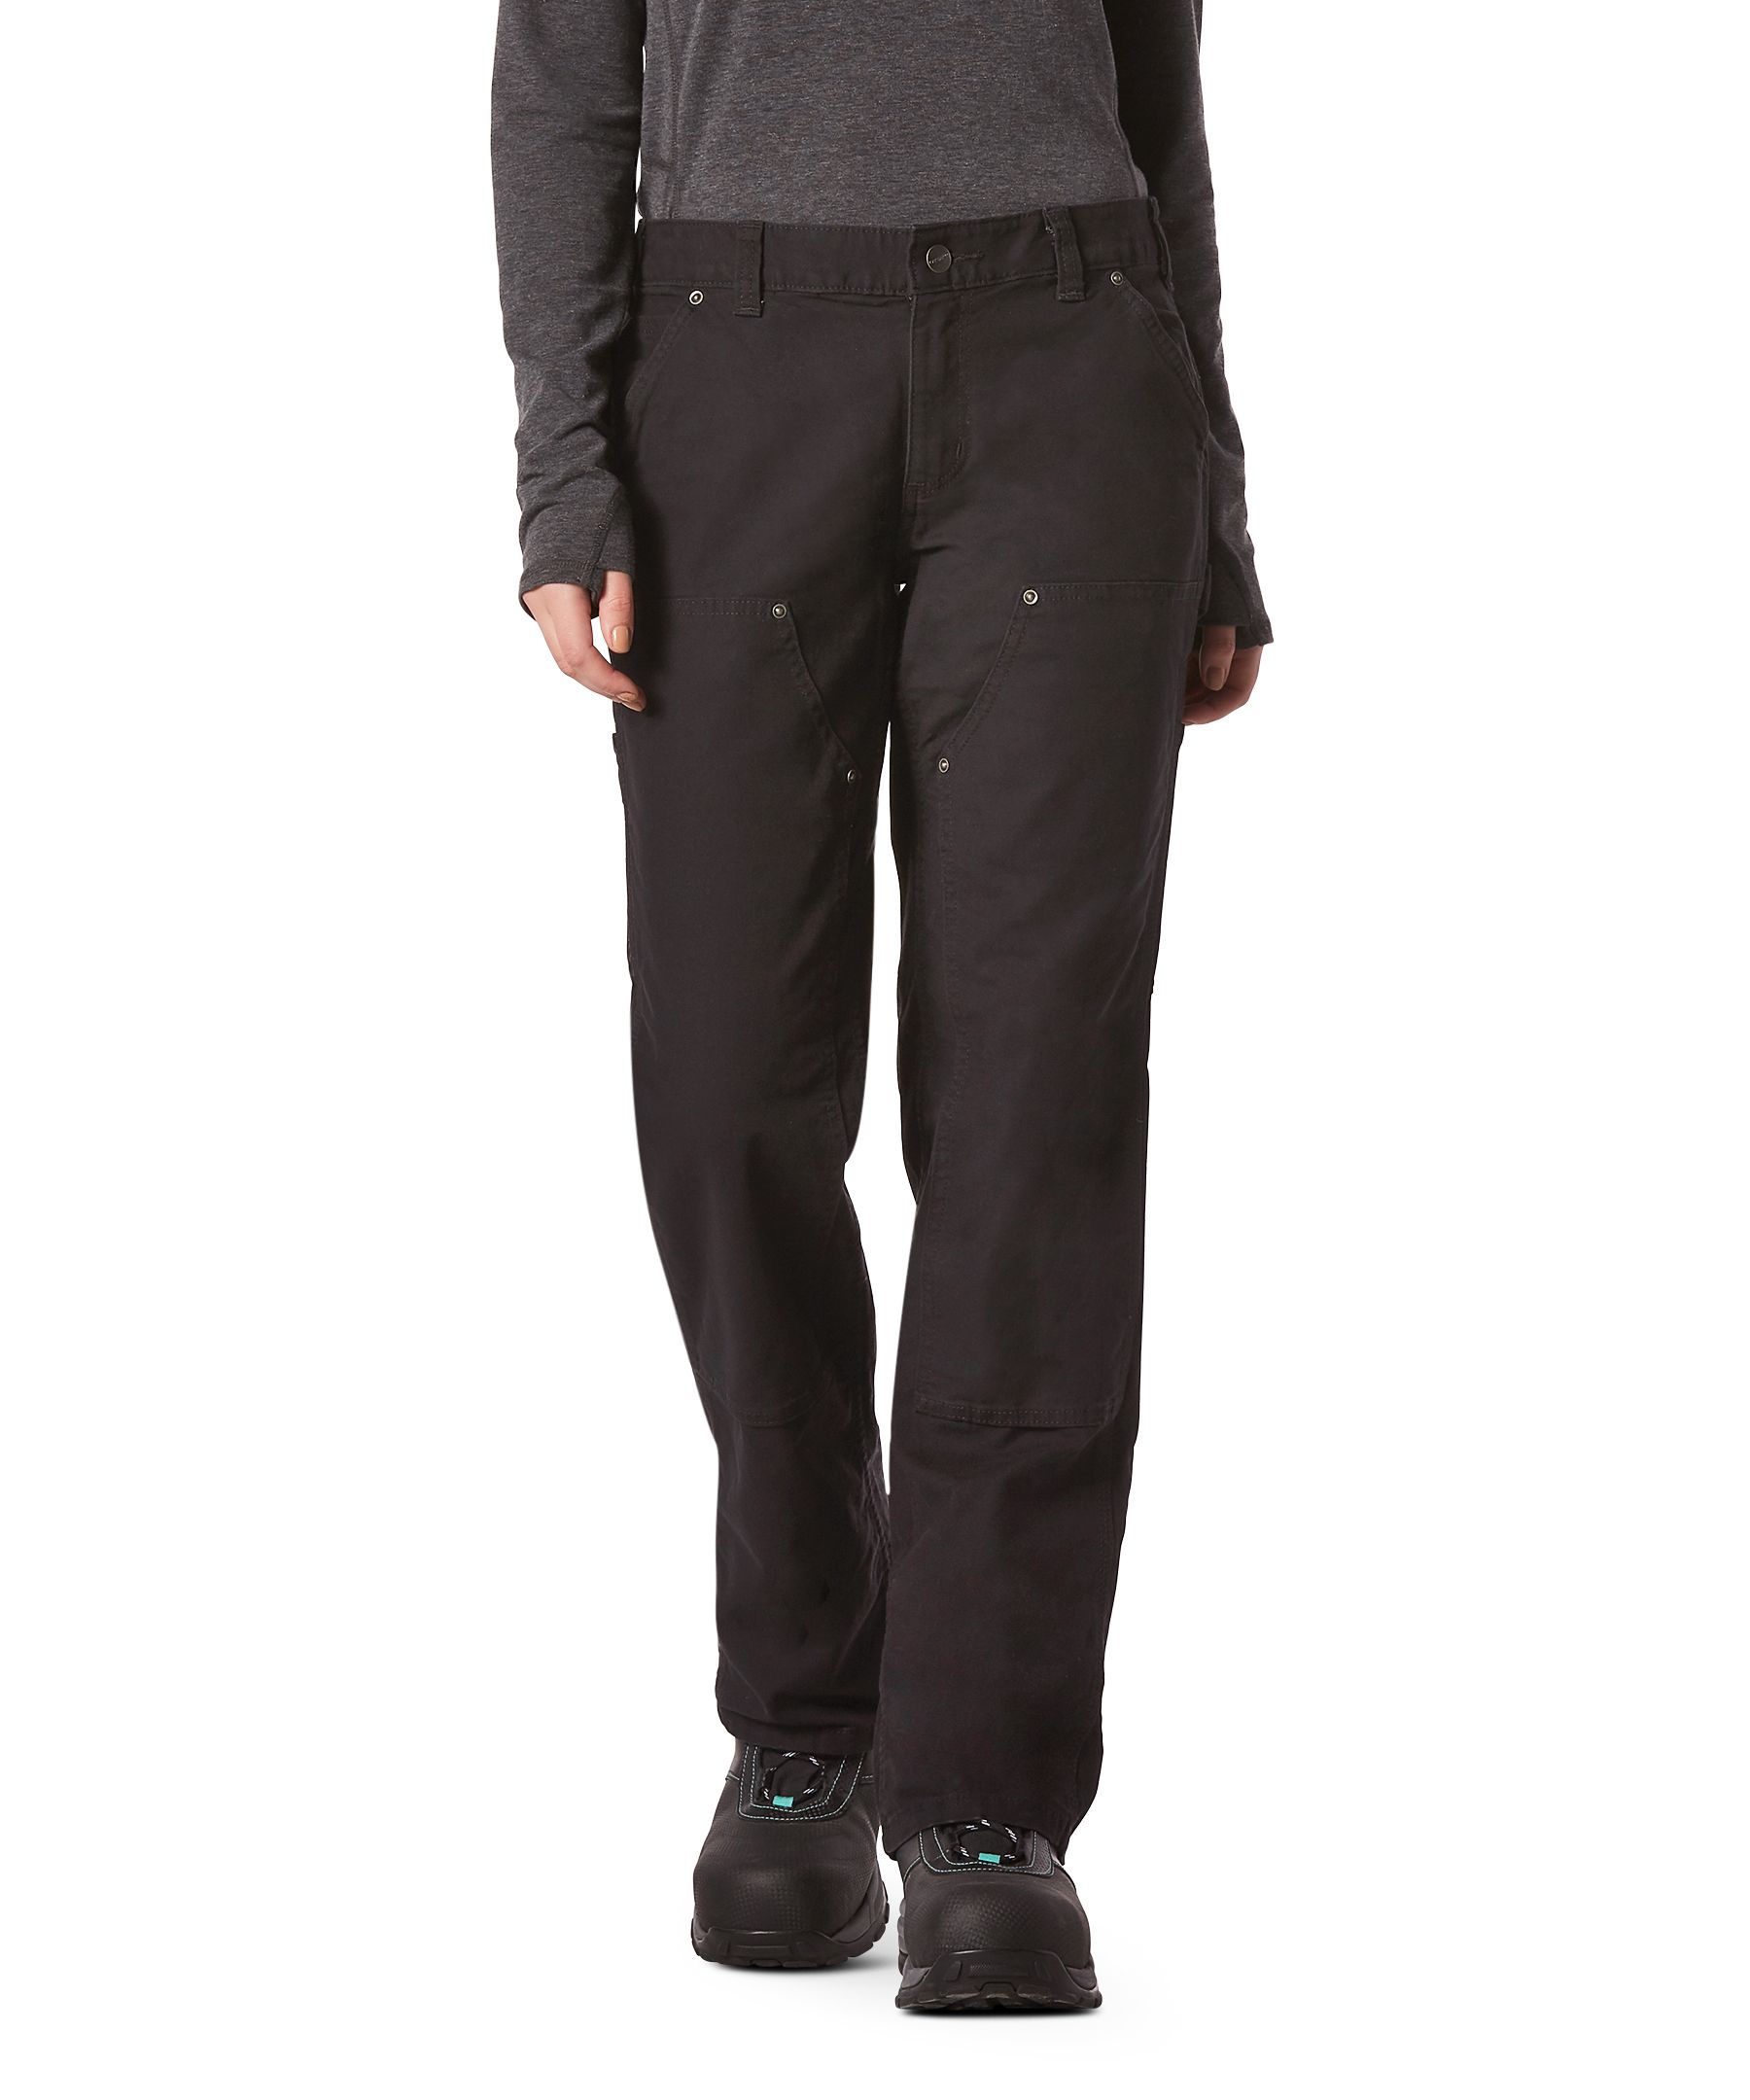 Carhartt Women's Rugged Flex High Rise Loose Fit Canvas Double Front Work  Pants - Black